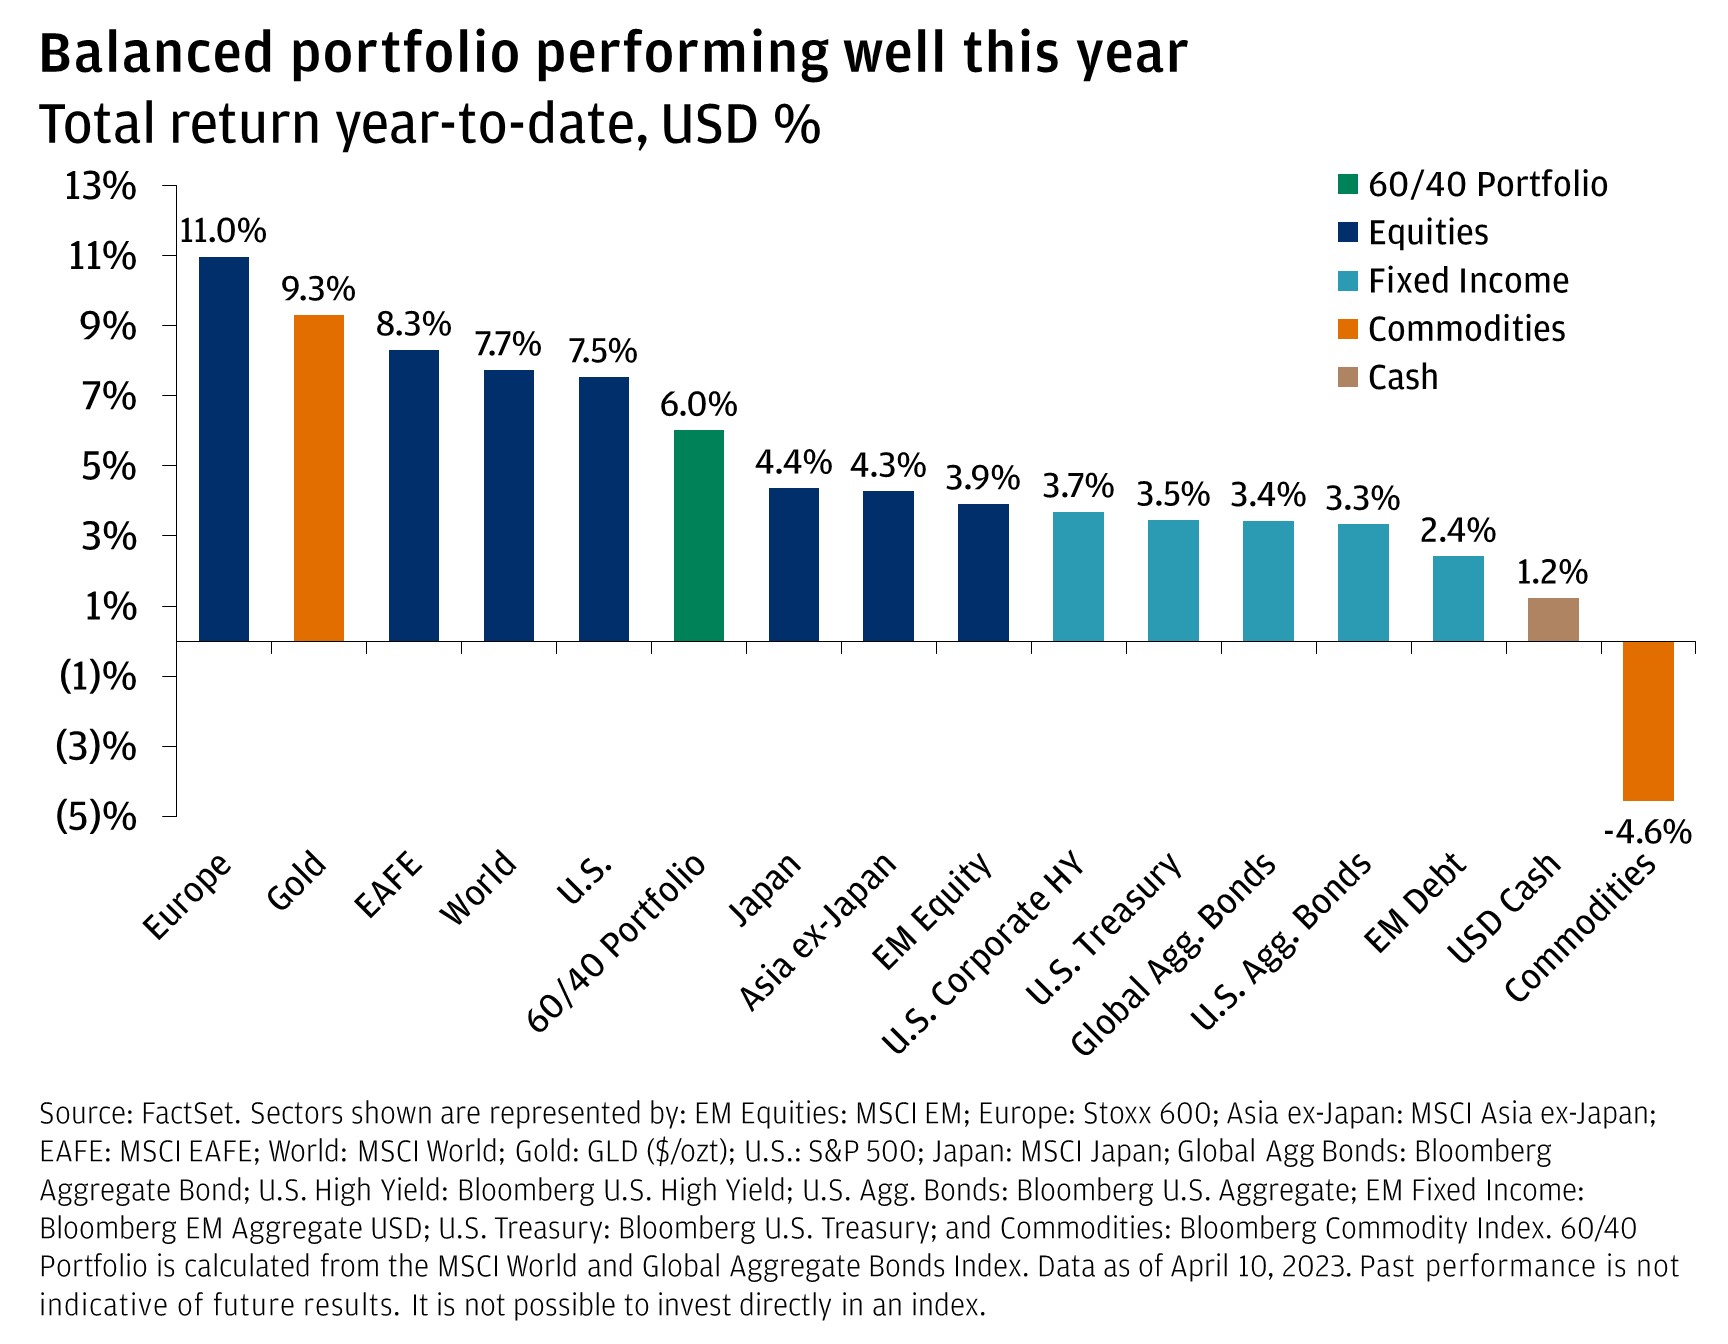 The chart describes the total YTD return (2023) in USD for 16 different data series under 5 categories (60/40 Portfolio, Equities, Fixed income, Commodities, Cash). 